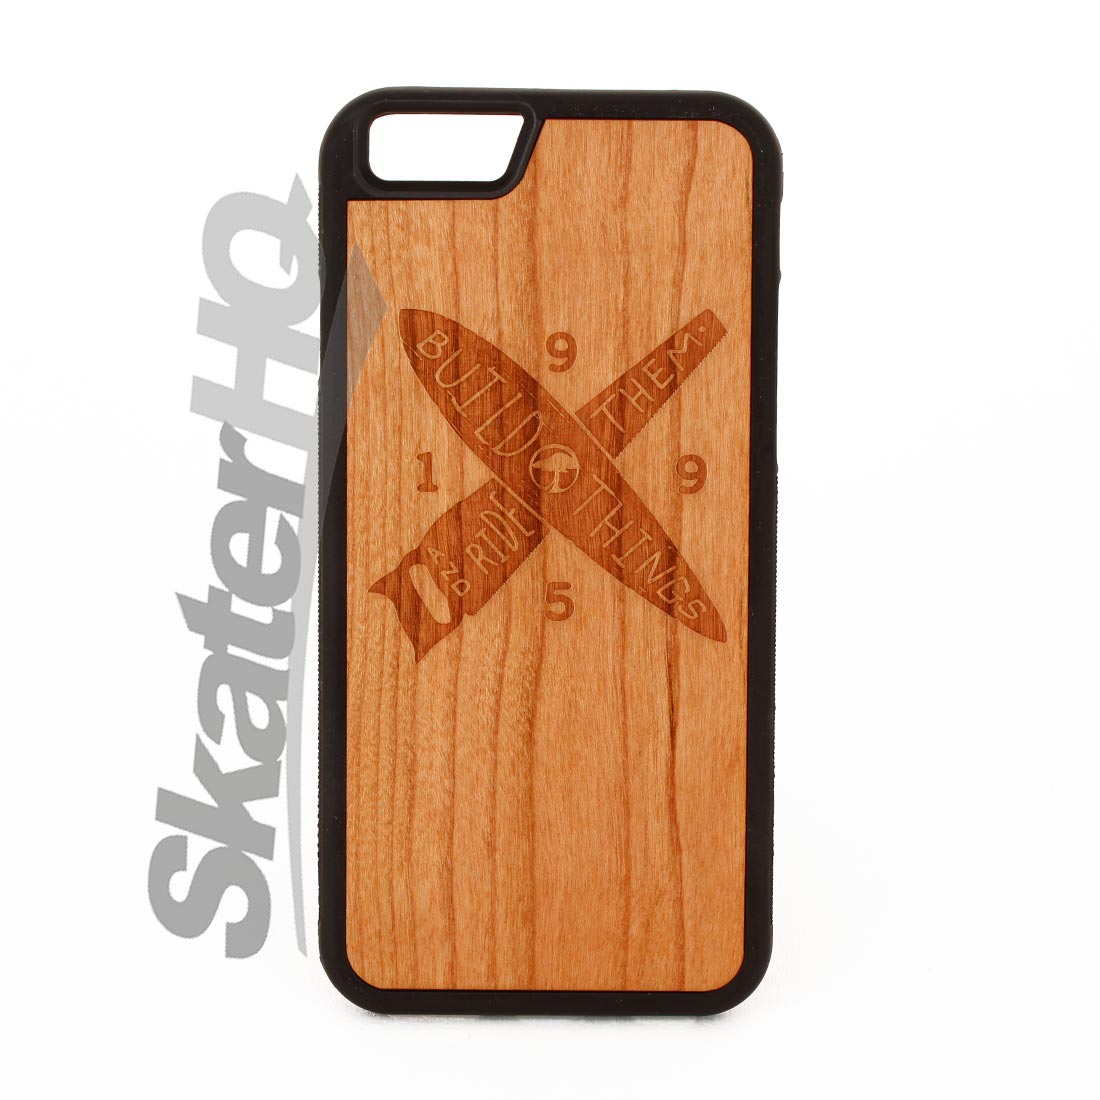 Arbor Build Things iPhone 6/6s Case - Cherry Skateboard Accessories